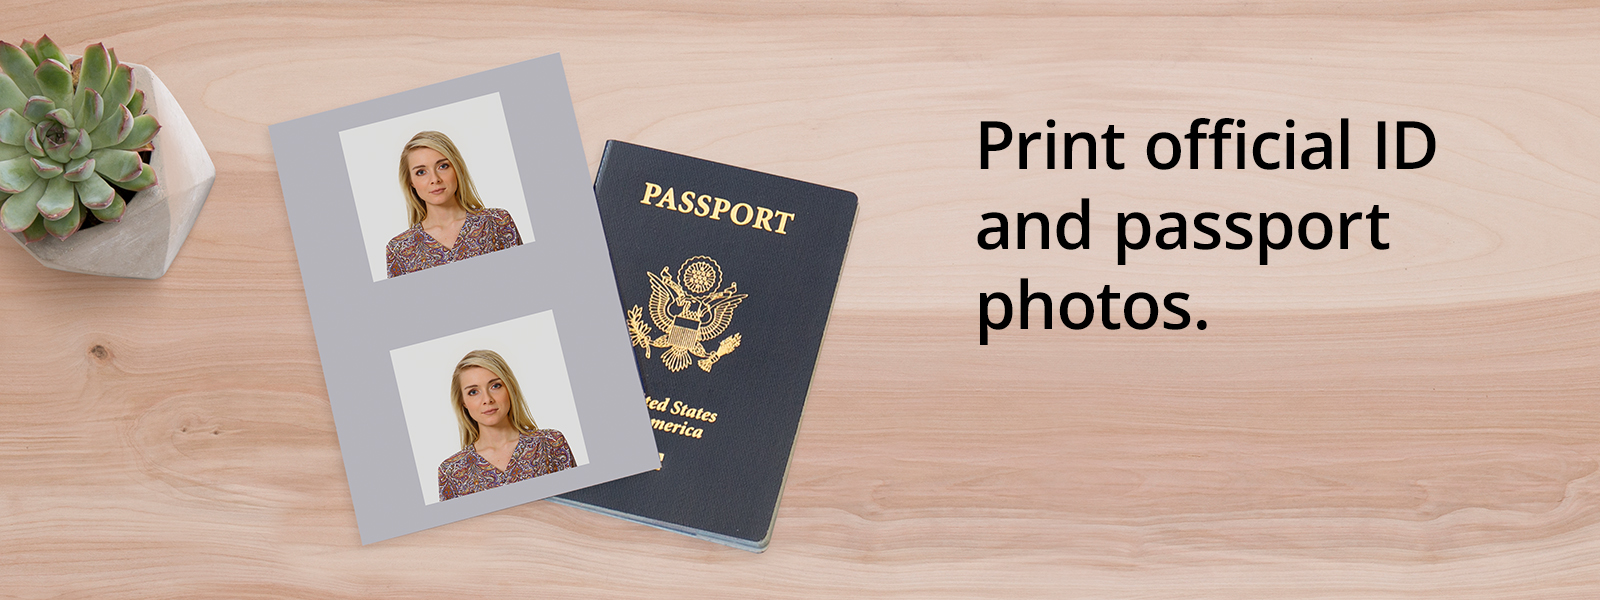 Official passport and ID photos 